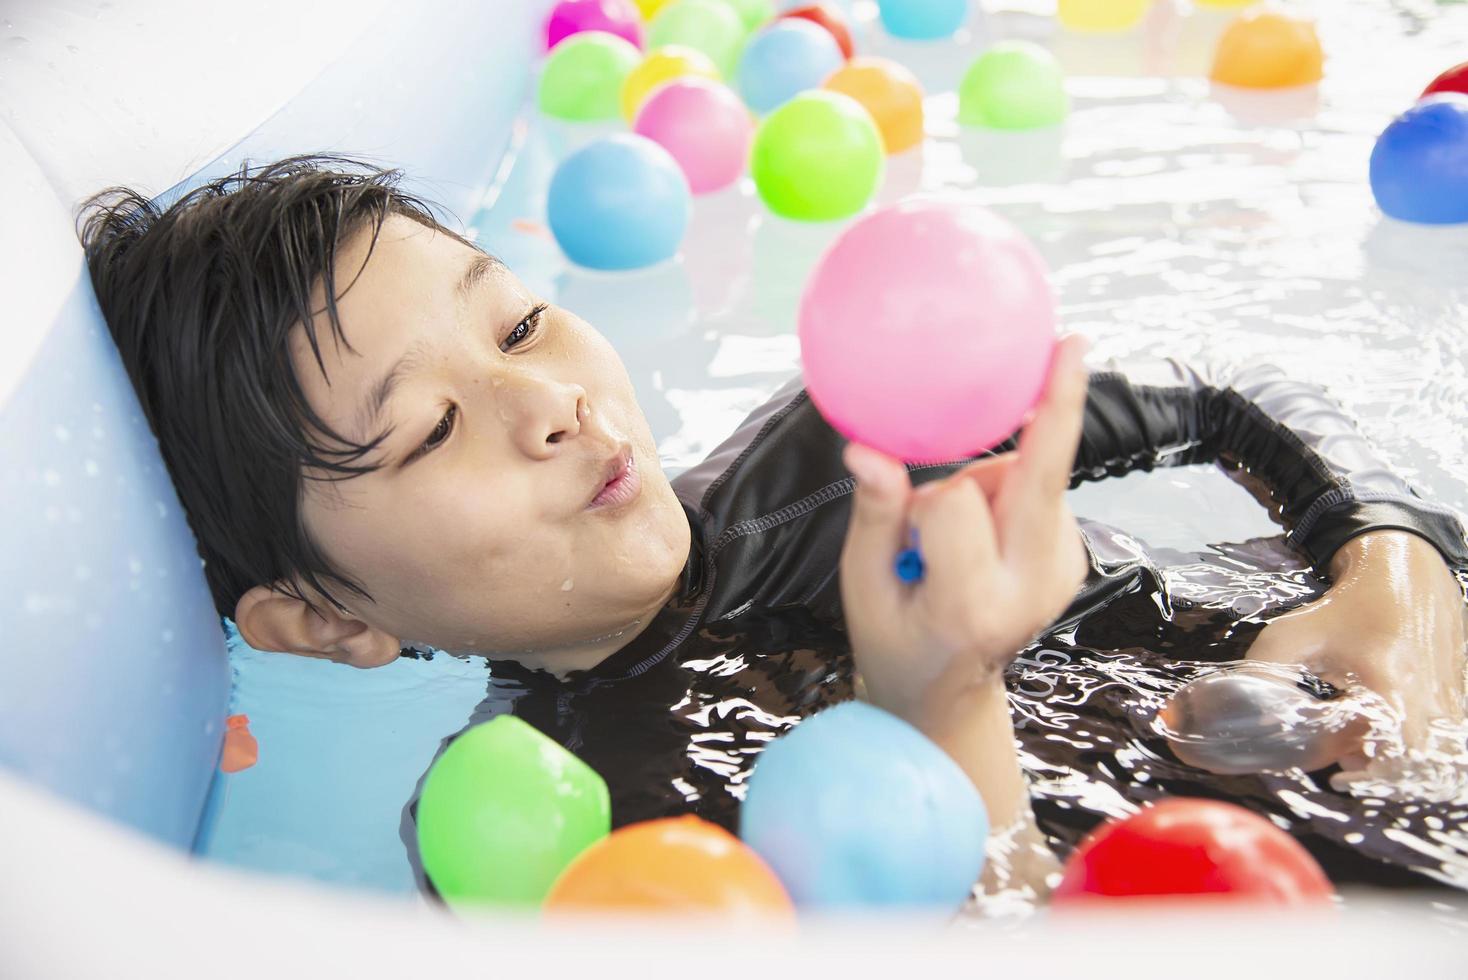 Boy playing with colourful ball in small swimming pool toy - happy boy in water pool toy concept photo